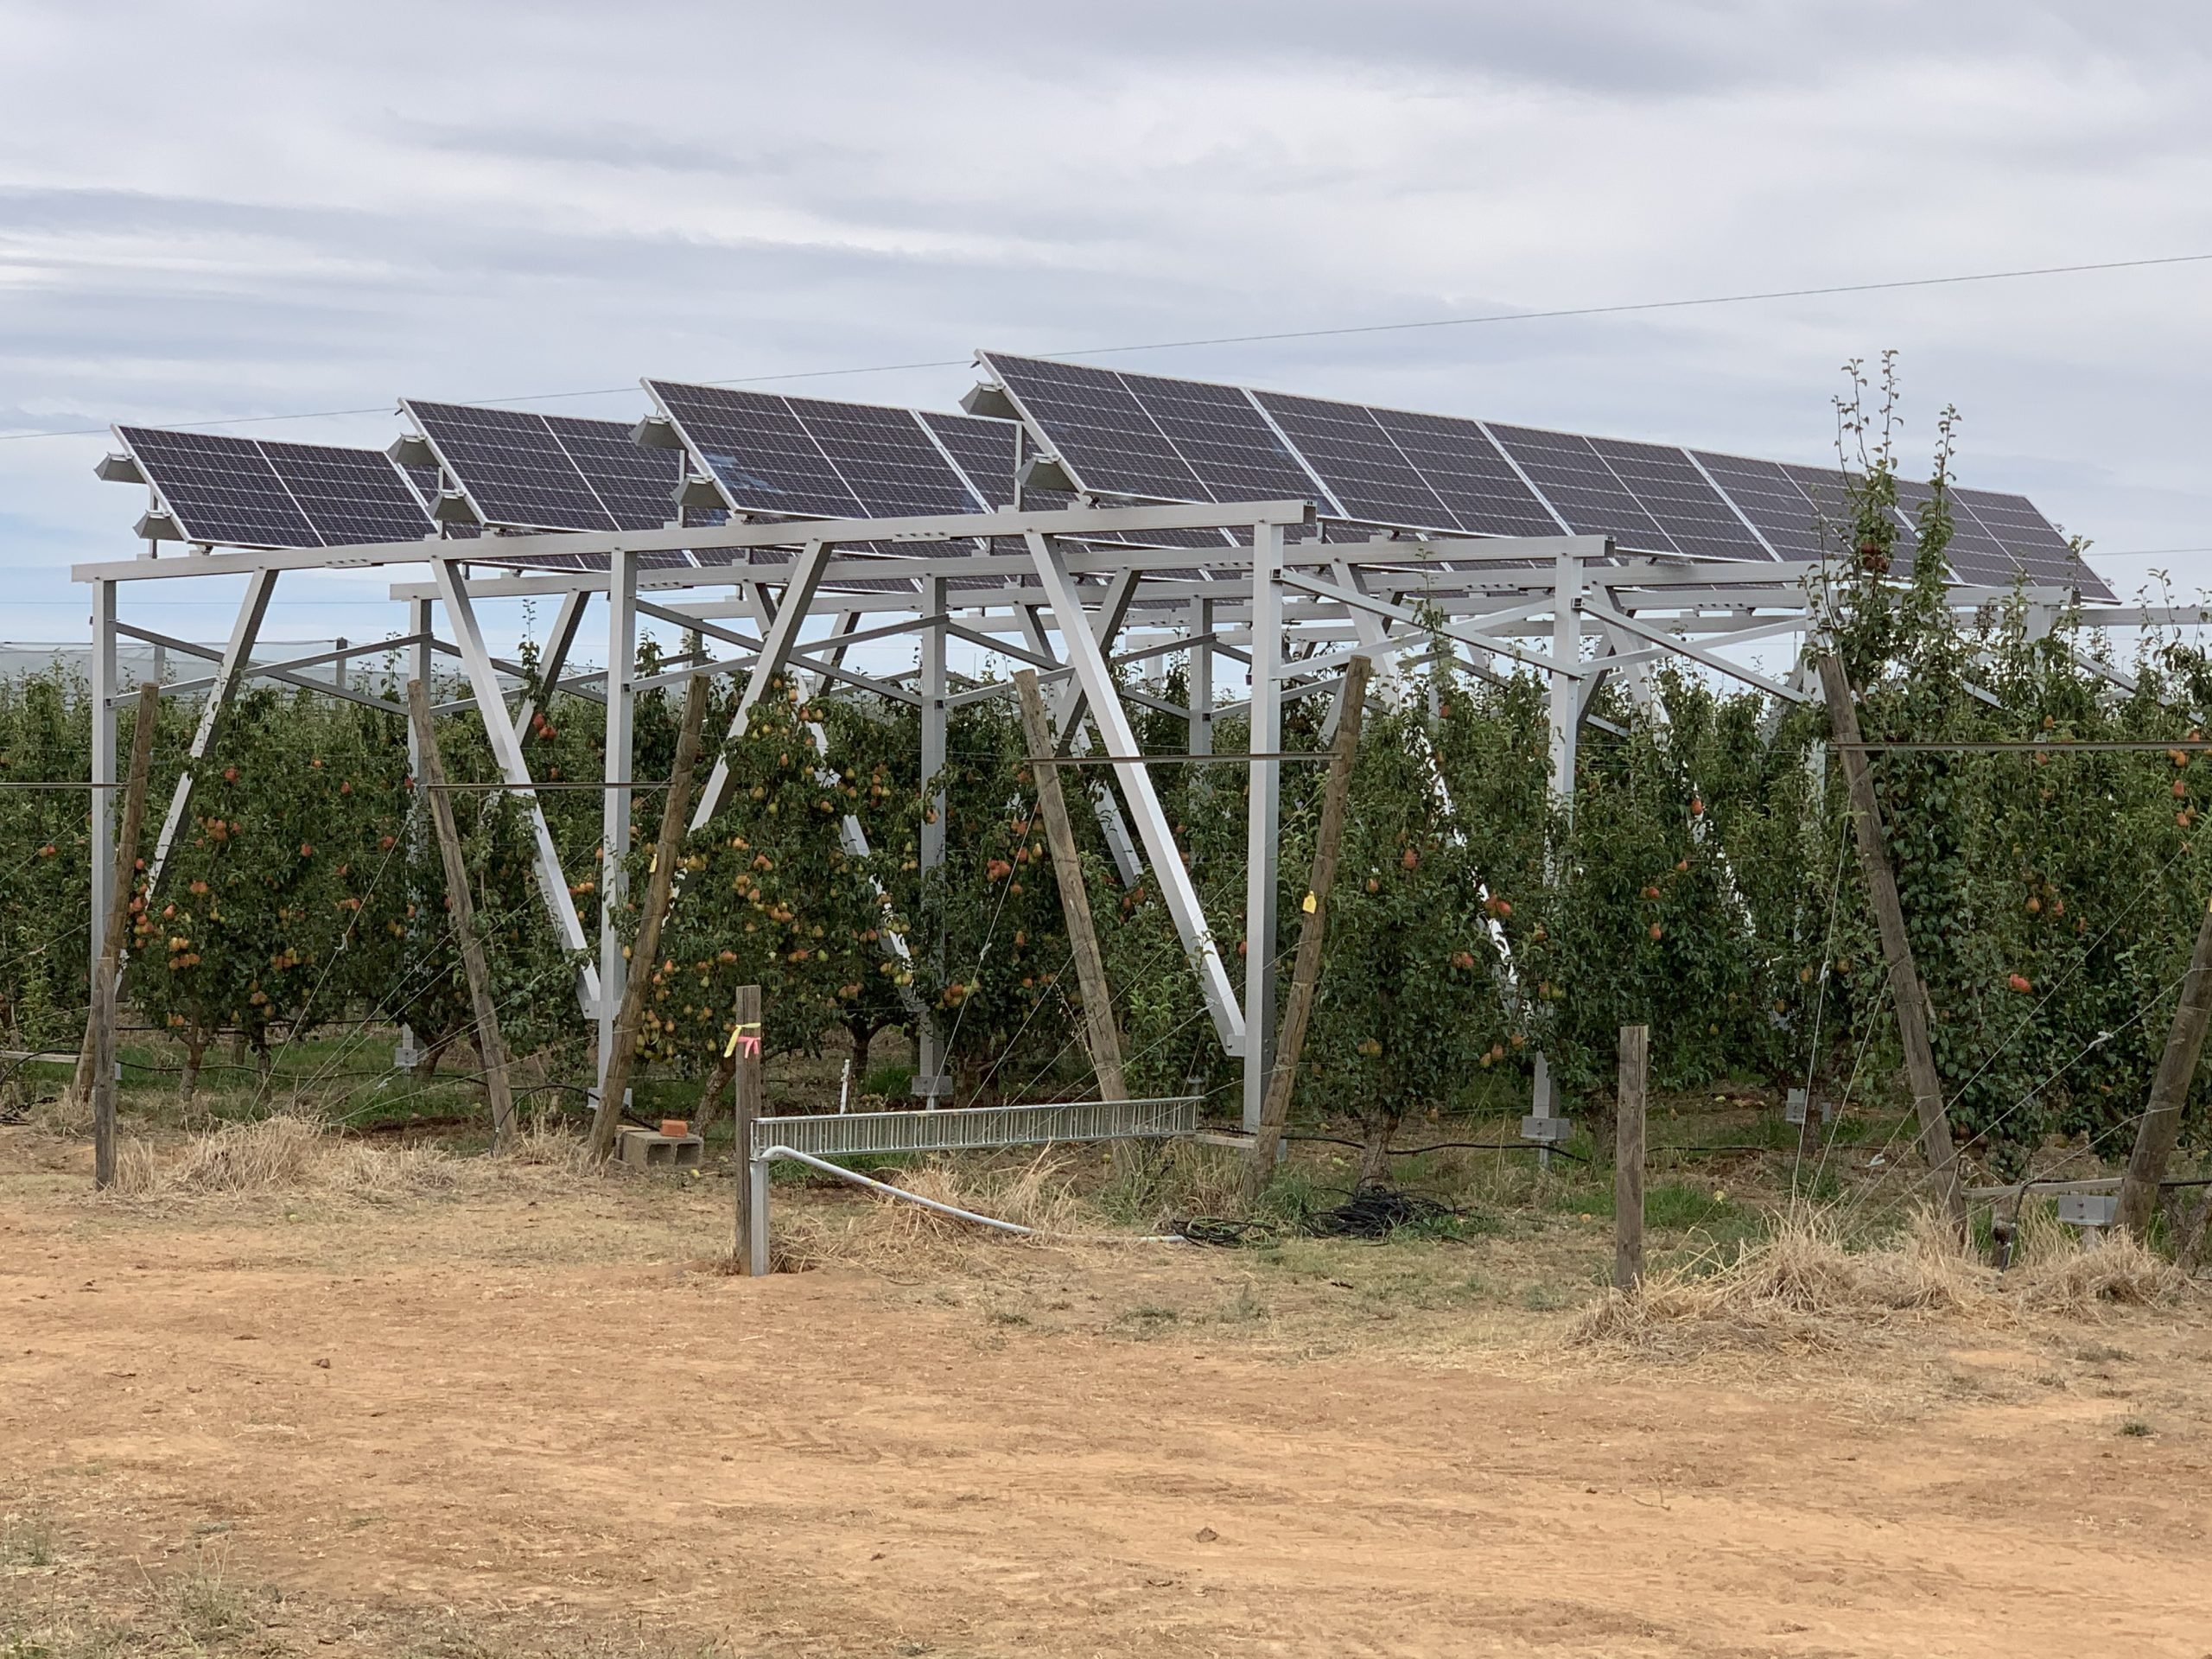 Solar panels over an orchard